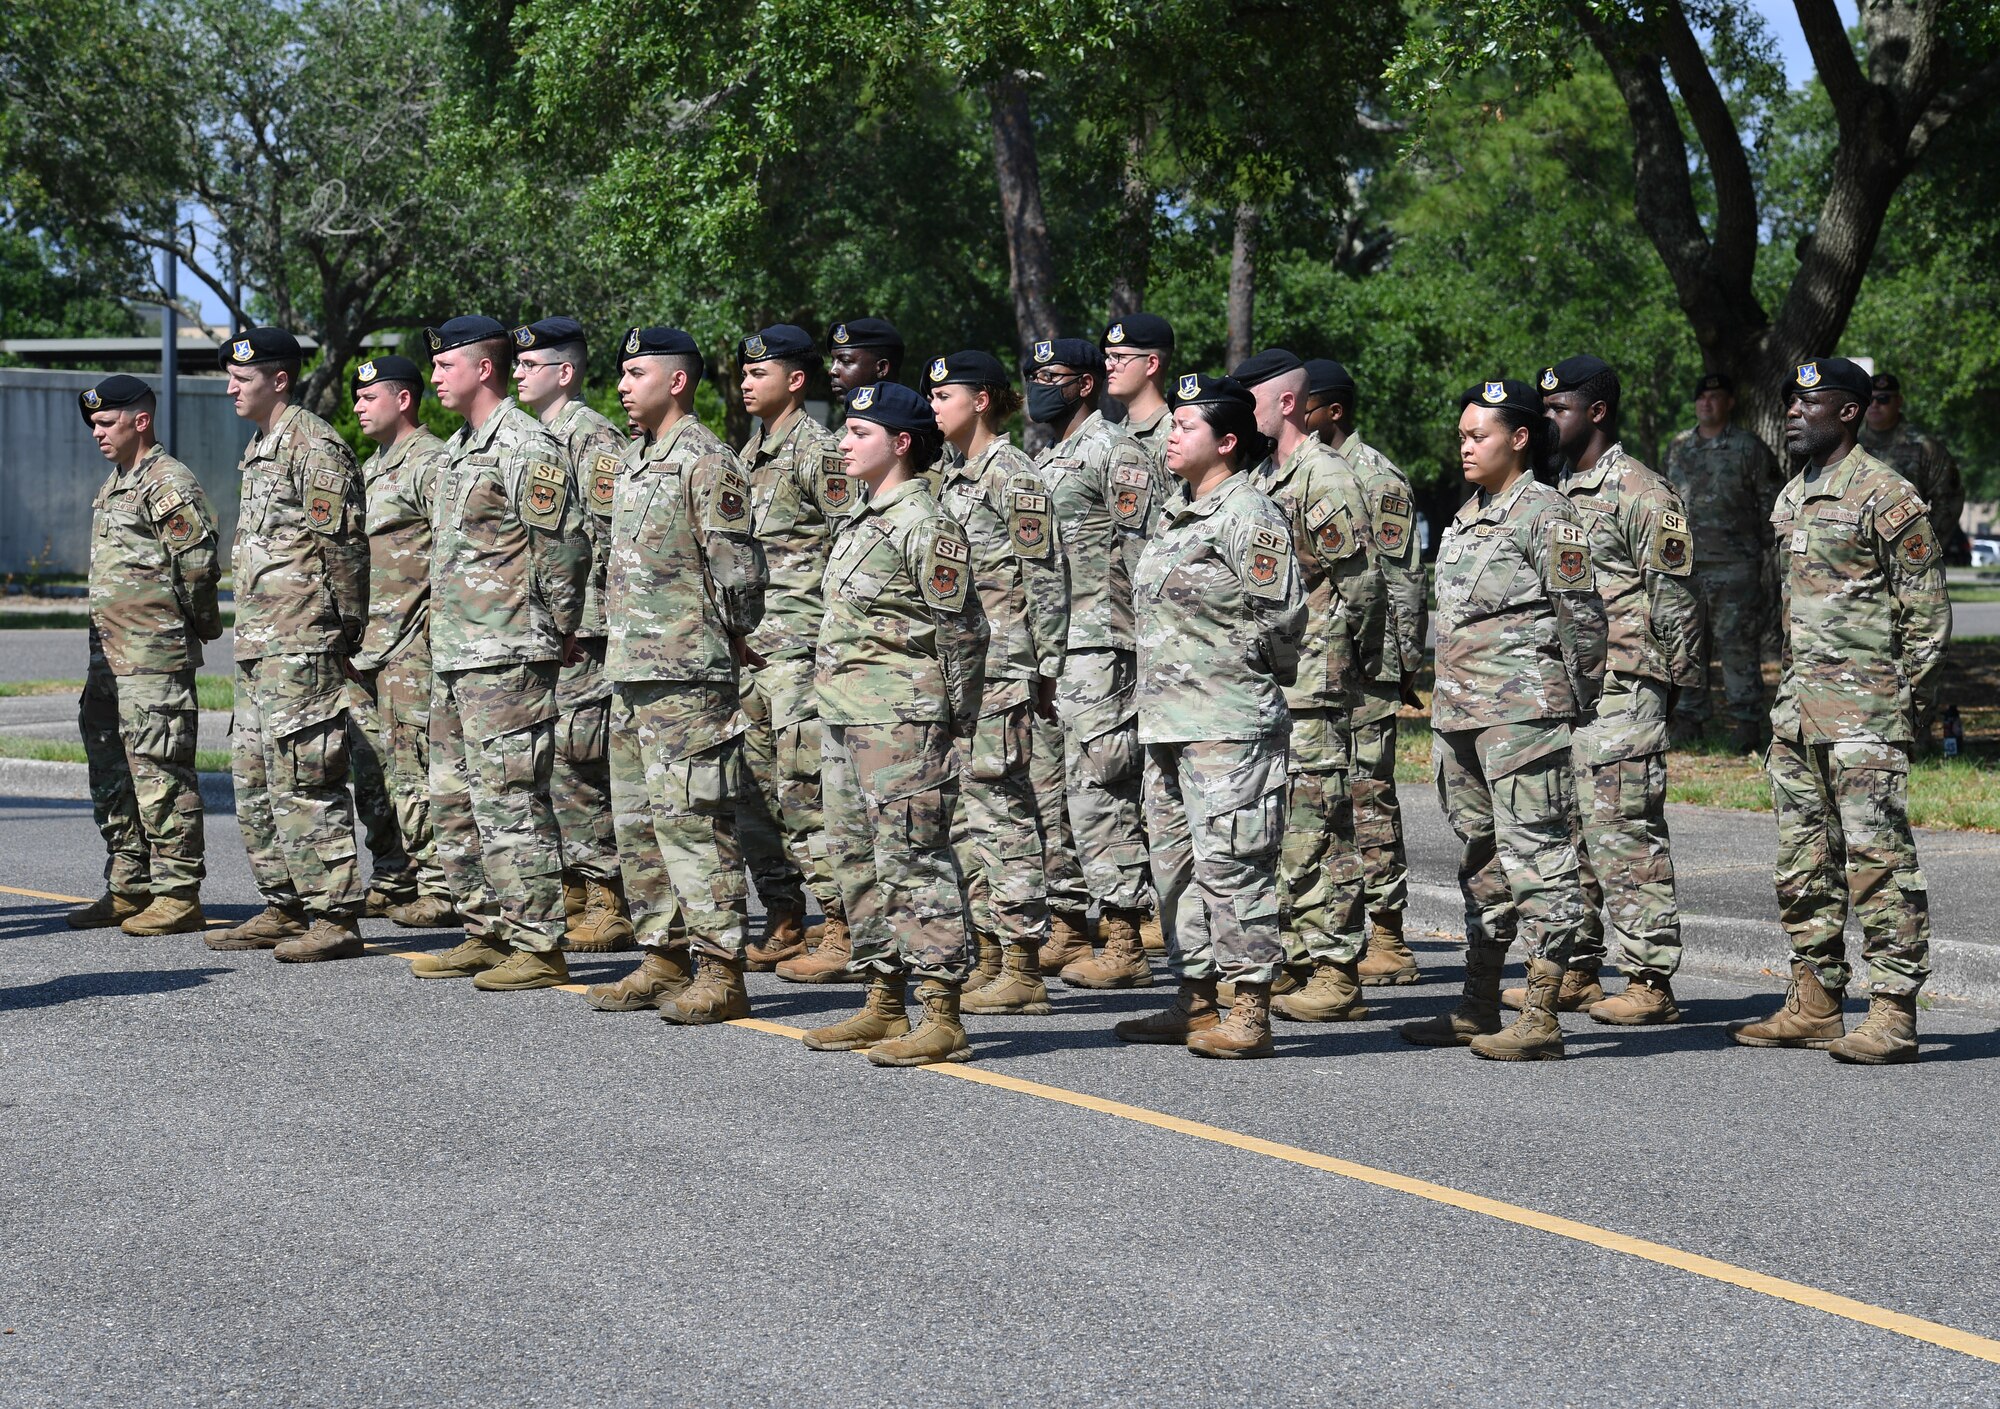 Members of the 81st Security Forces Squadron attend a retreat ceremony at Keesler Air Force Base, Mississippi, May 20, 2022. The ceremony, hosted by the 81st SFS, was the last of several events held in celebration of this year's Police Week. (U.S. Air Force photo by Kemberly Groue)